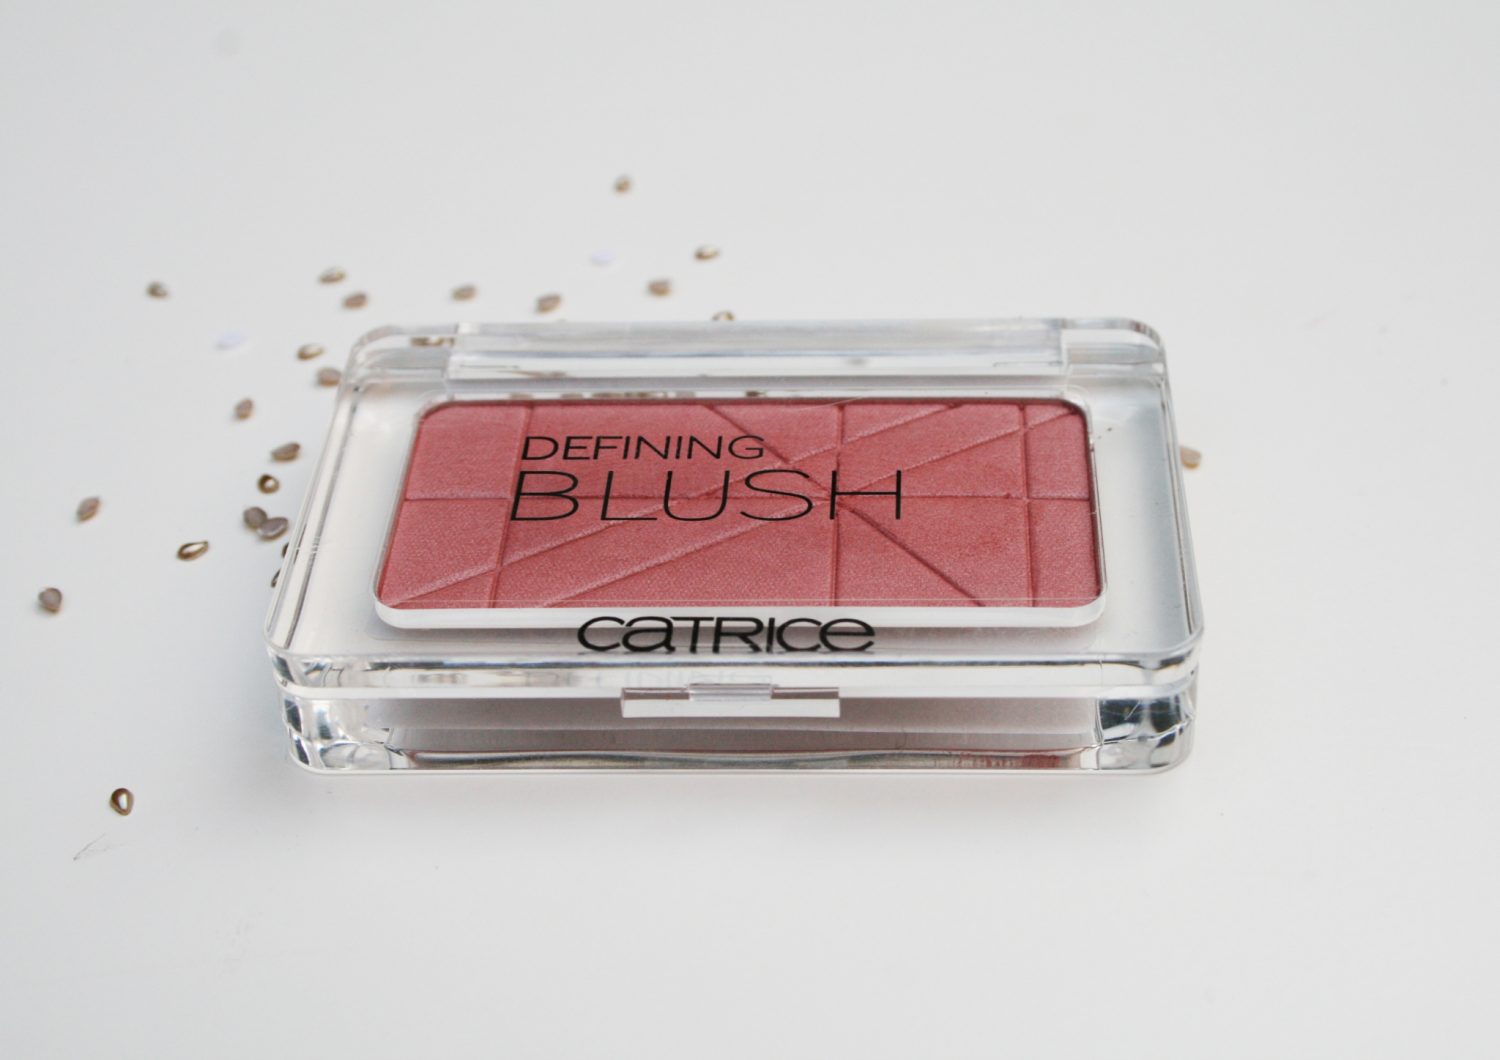 Review: Catrice Defining Blush 080 Sunrose Avenue